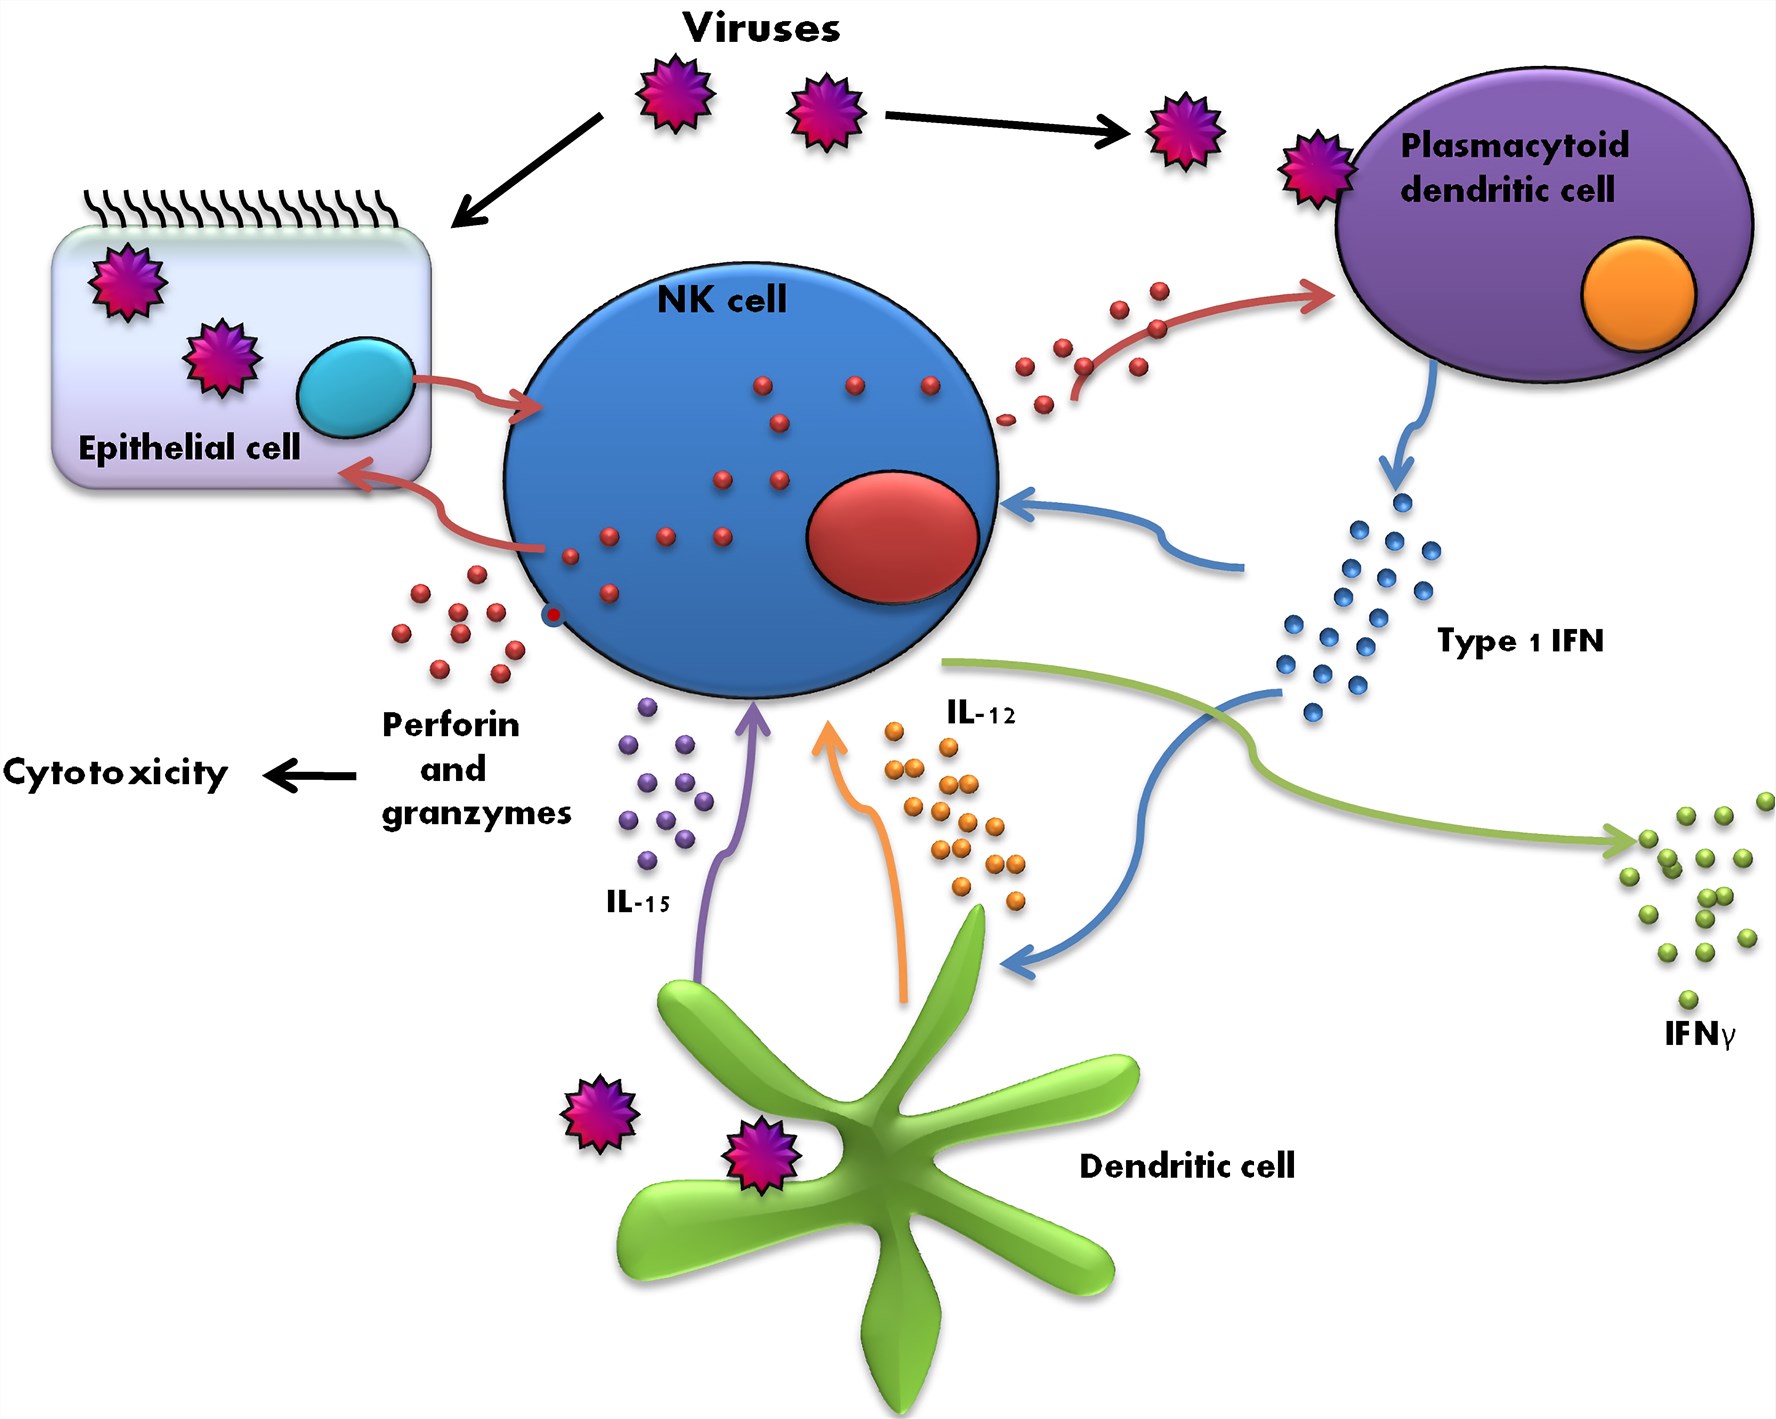 Activation of NK, dendritic cells and soluble molecules during virus infection.